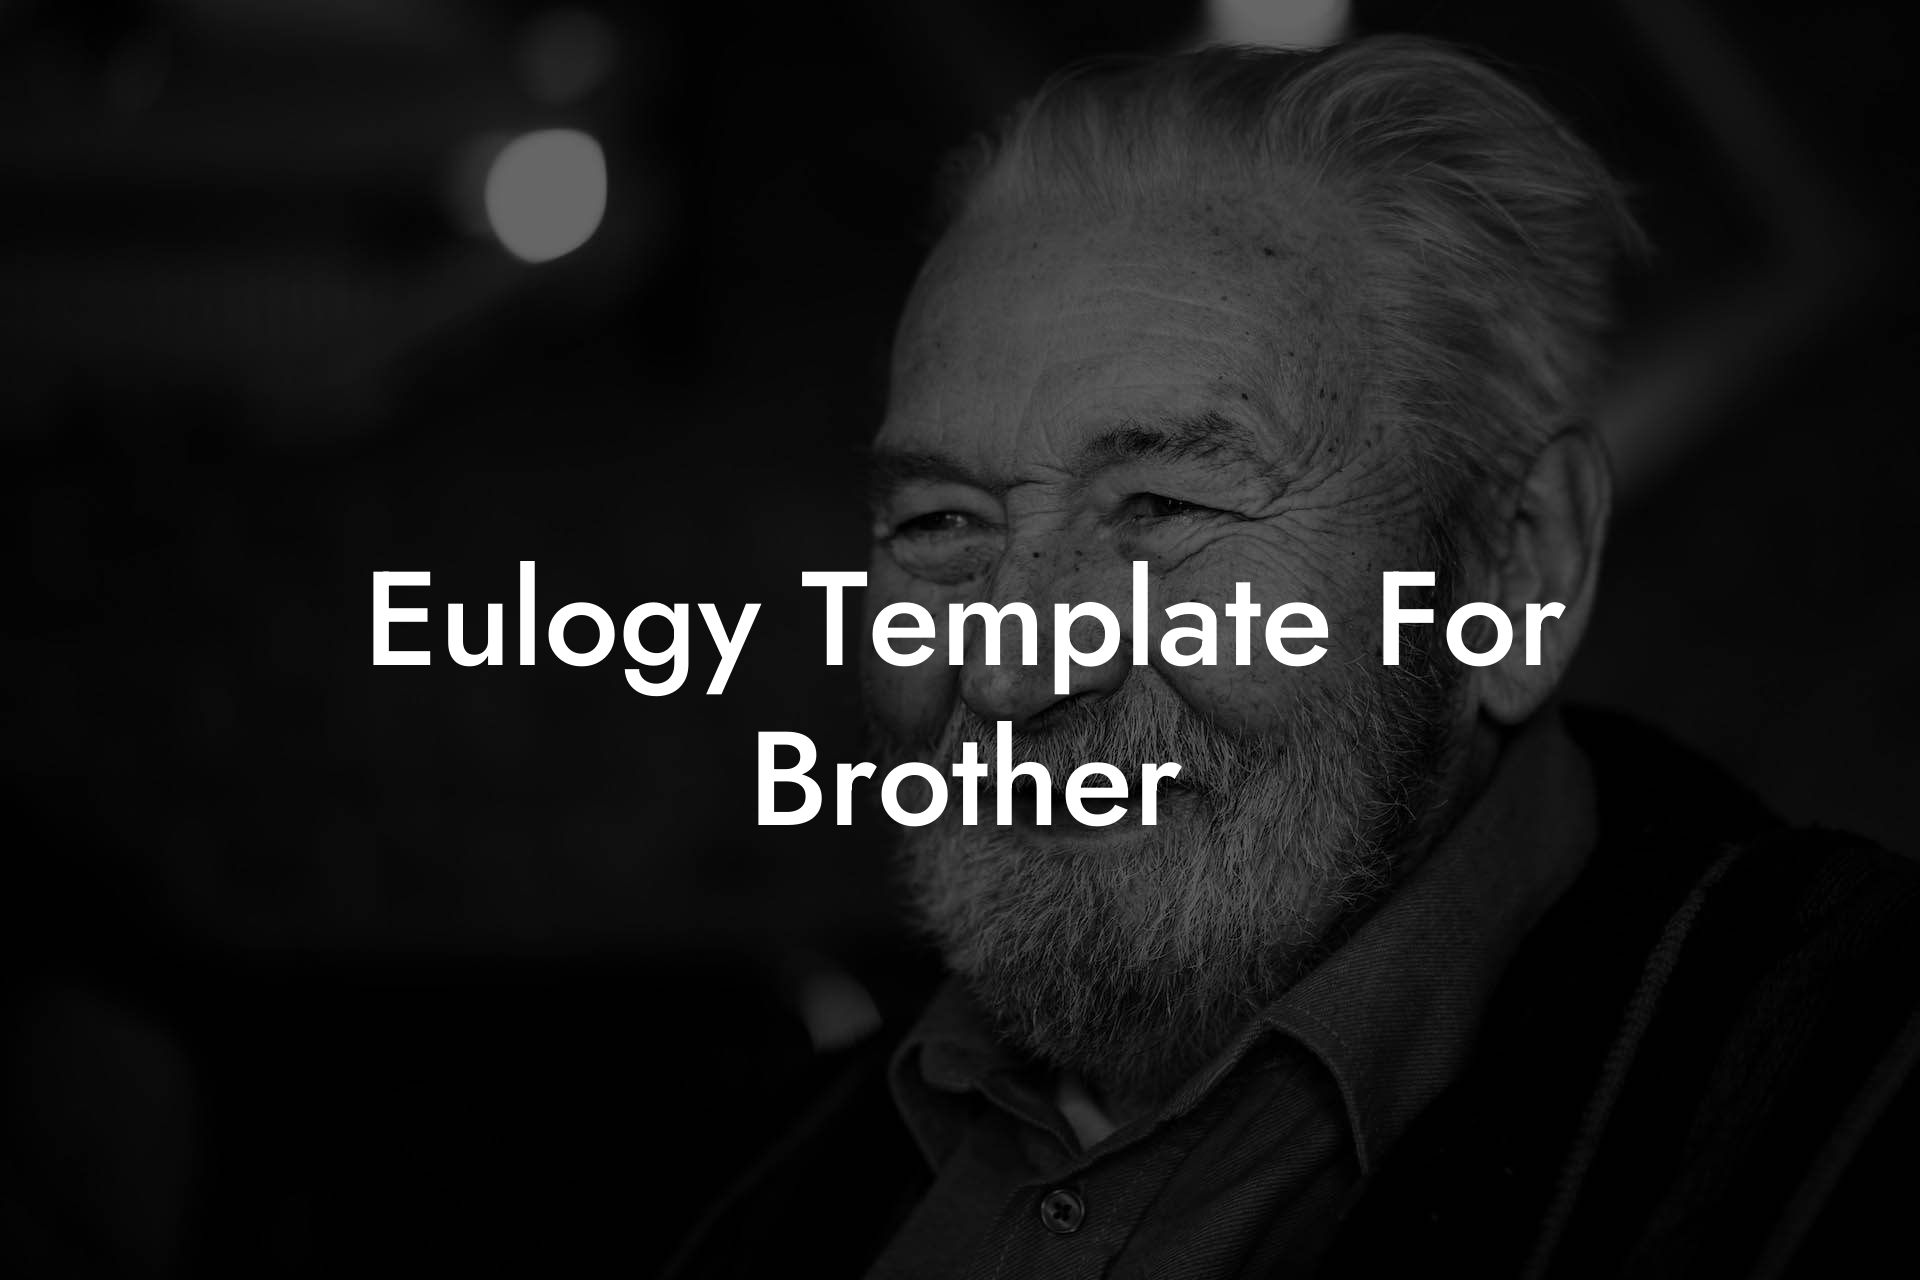 Eulogy Template For Brother